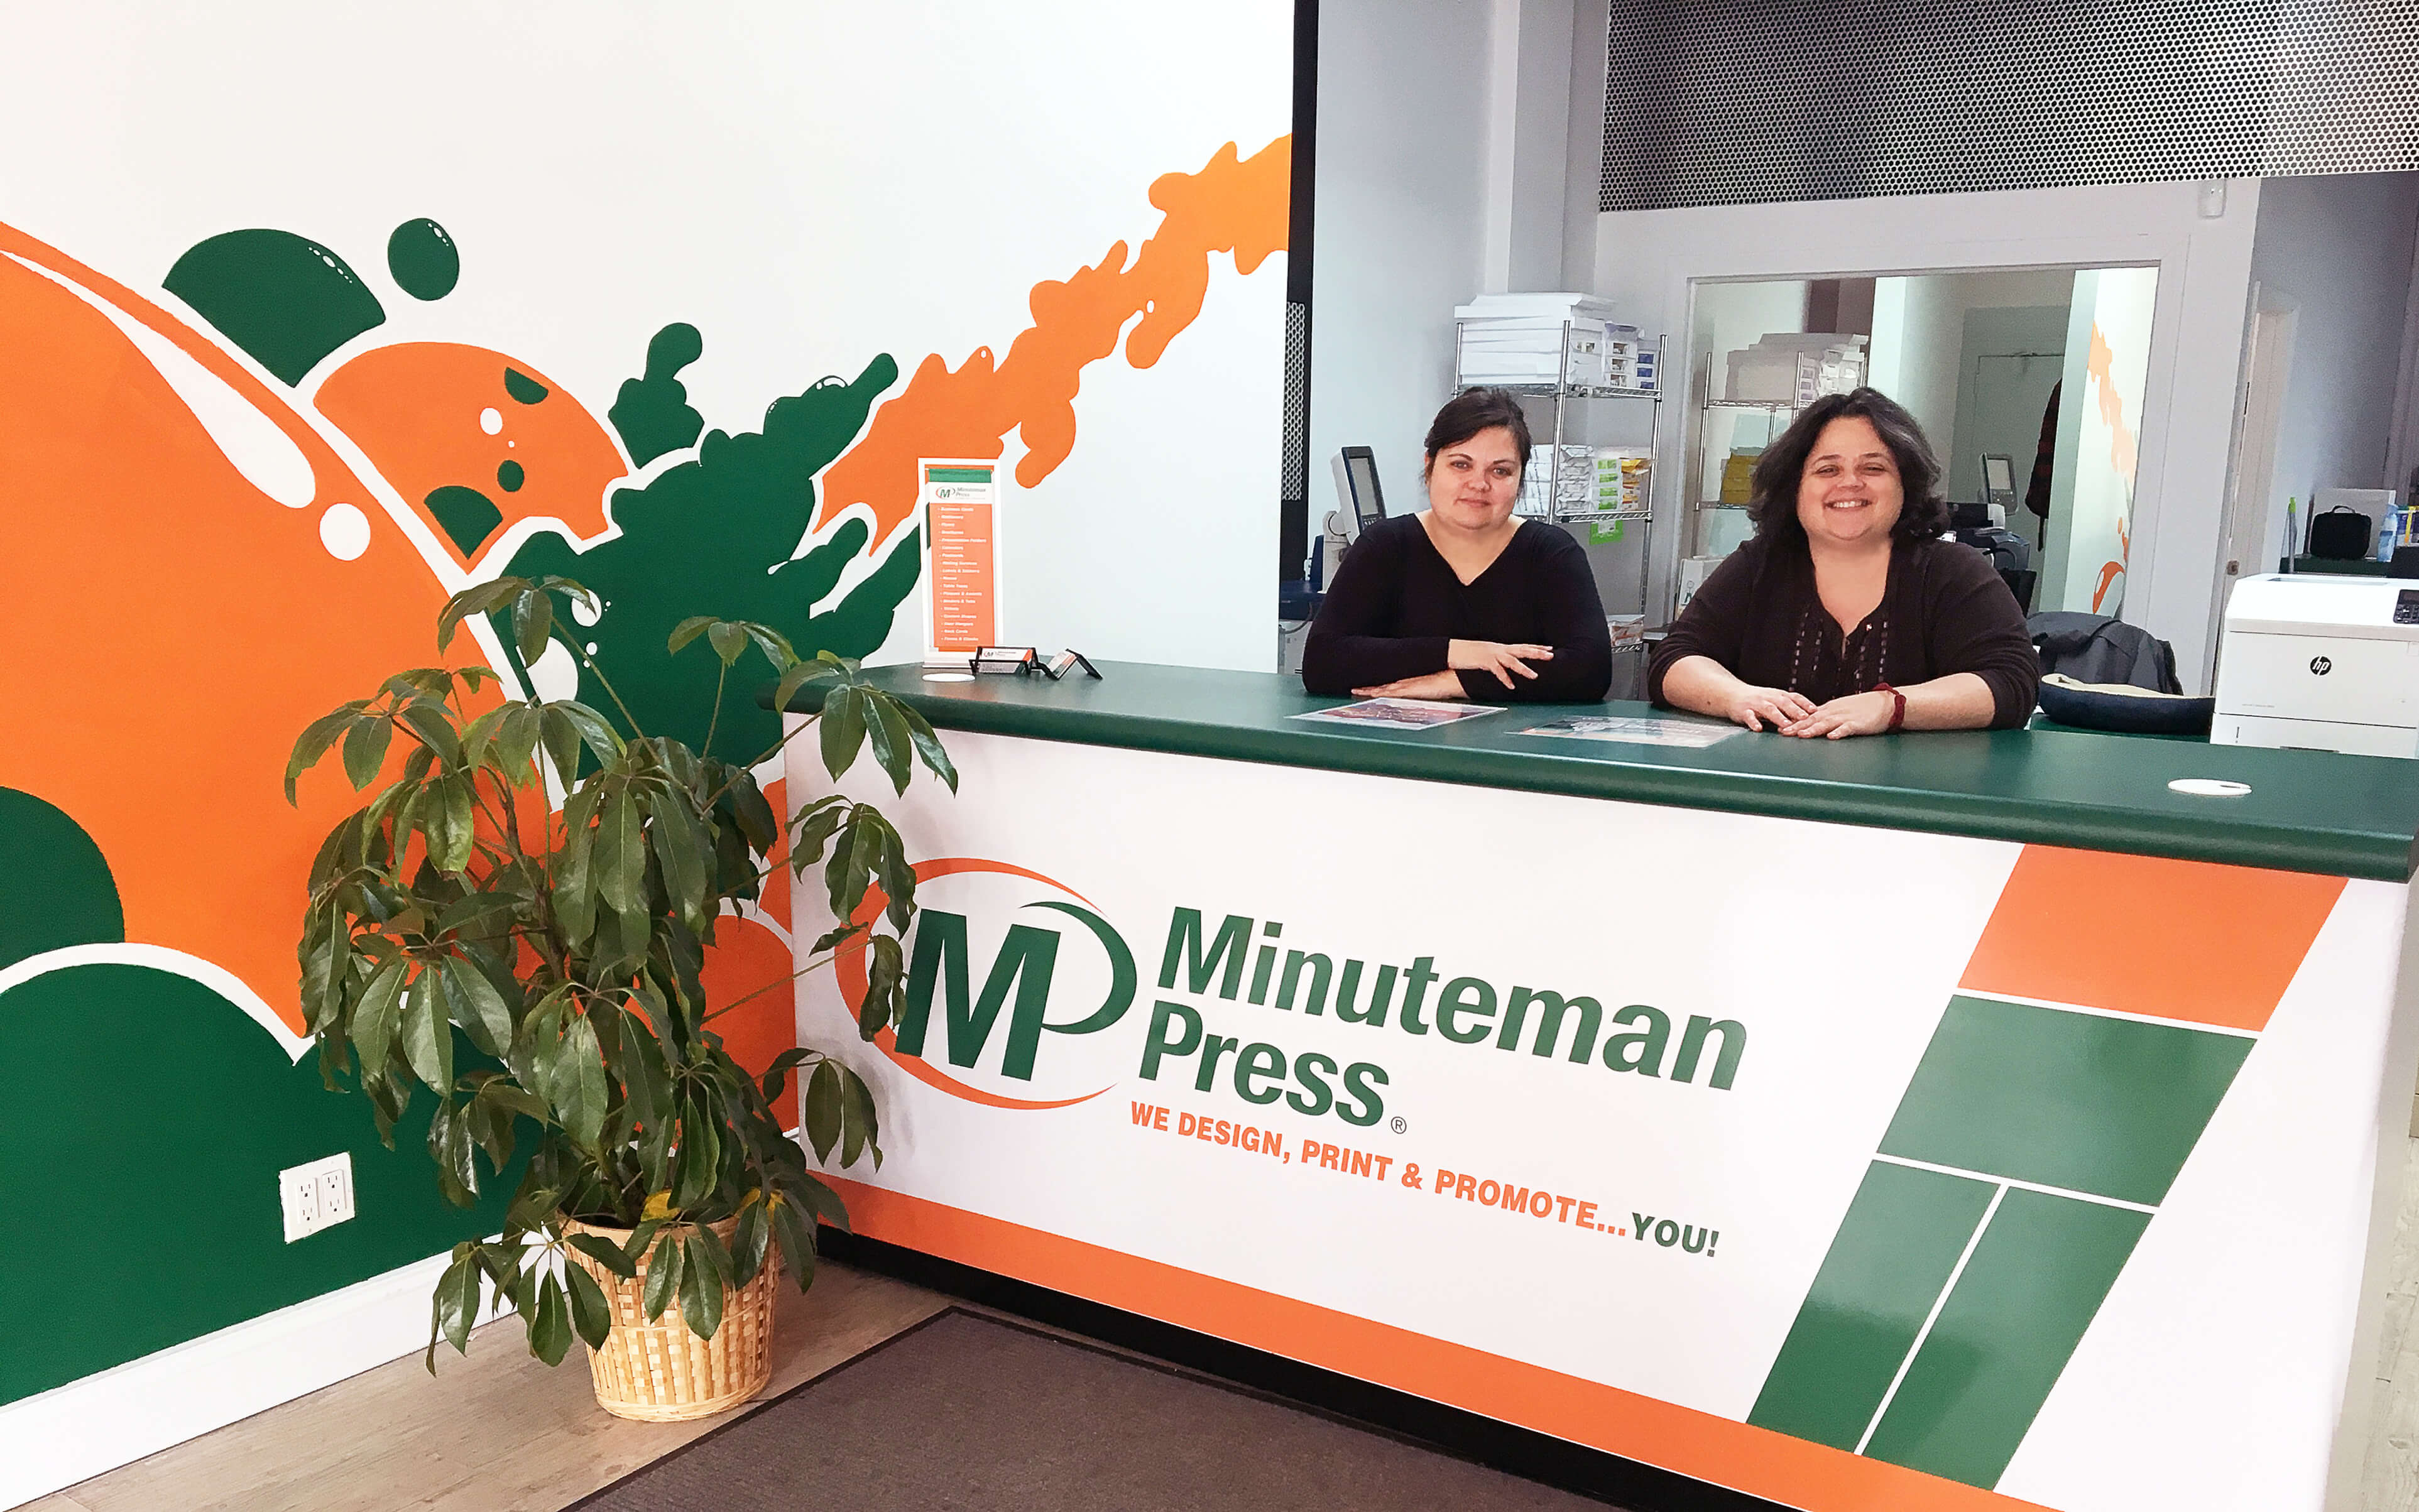 Astoria natives Tracey Pomponio-Lasko (left) and Linda Pomponio (right) run the new Minuteman Press design, marketing, and printing business located at 31-16 36th Avenue in Astoria, Queens, NY